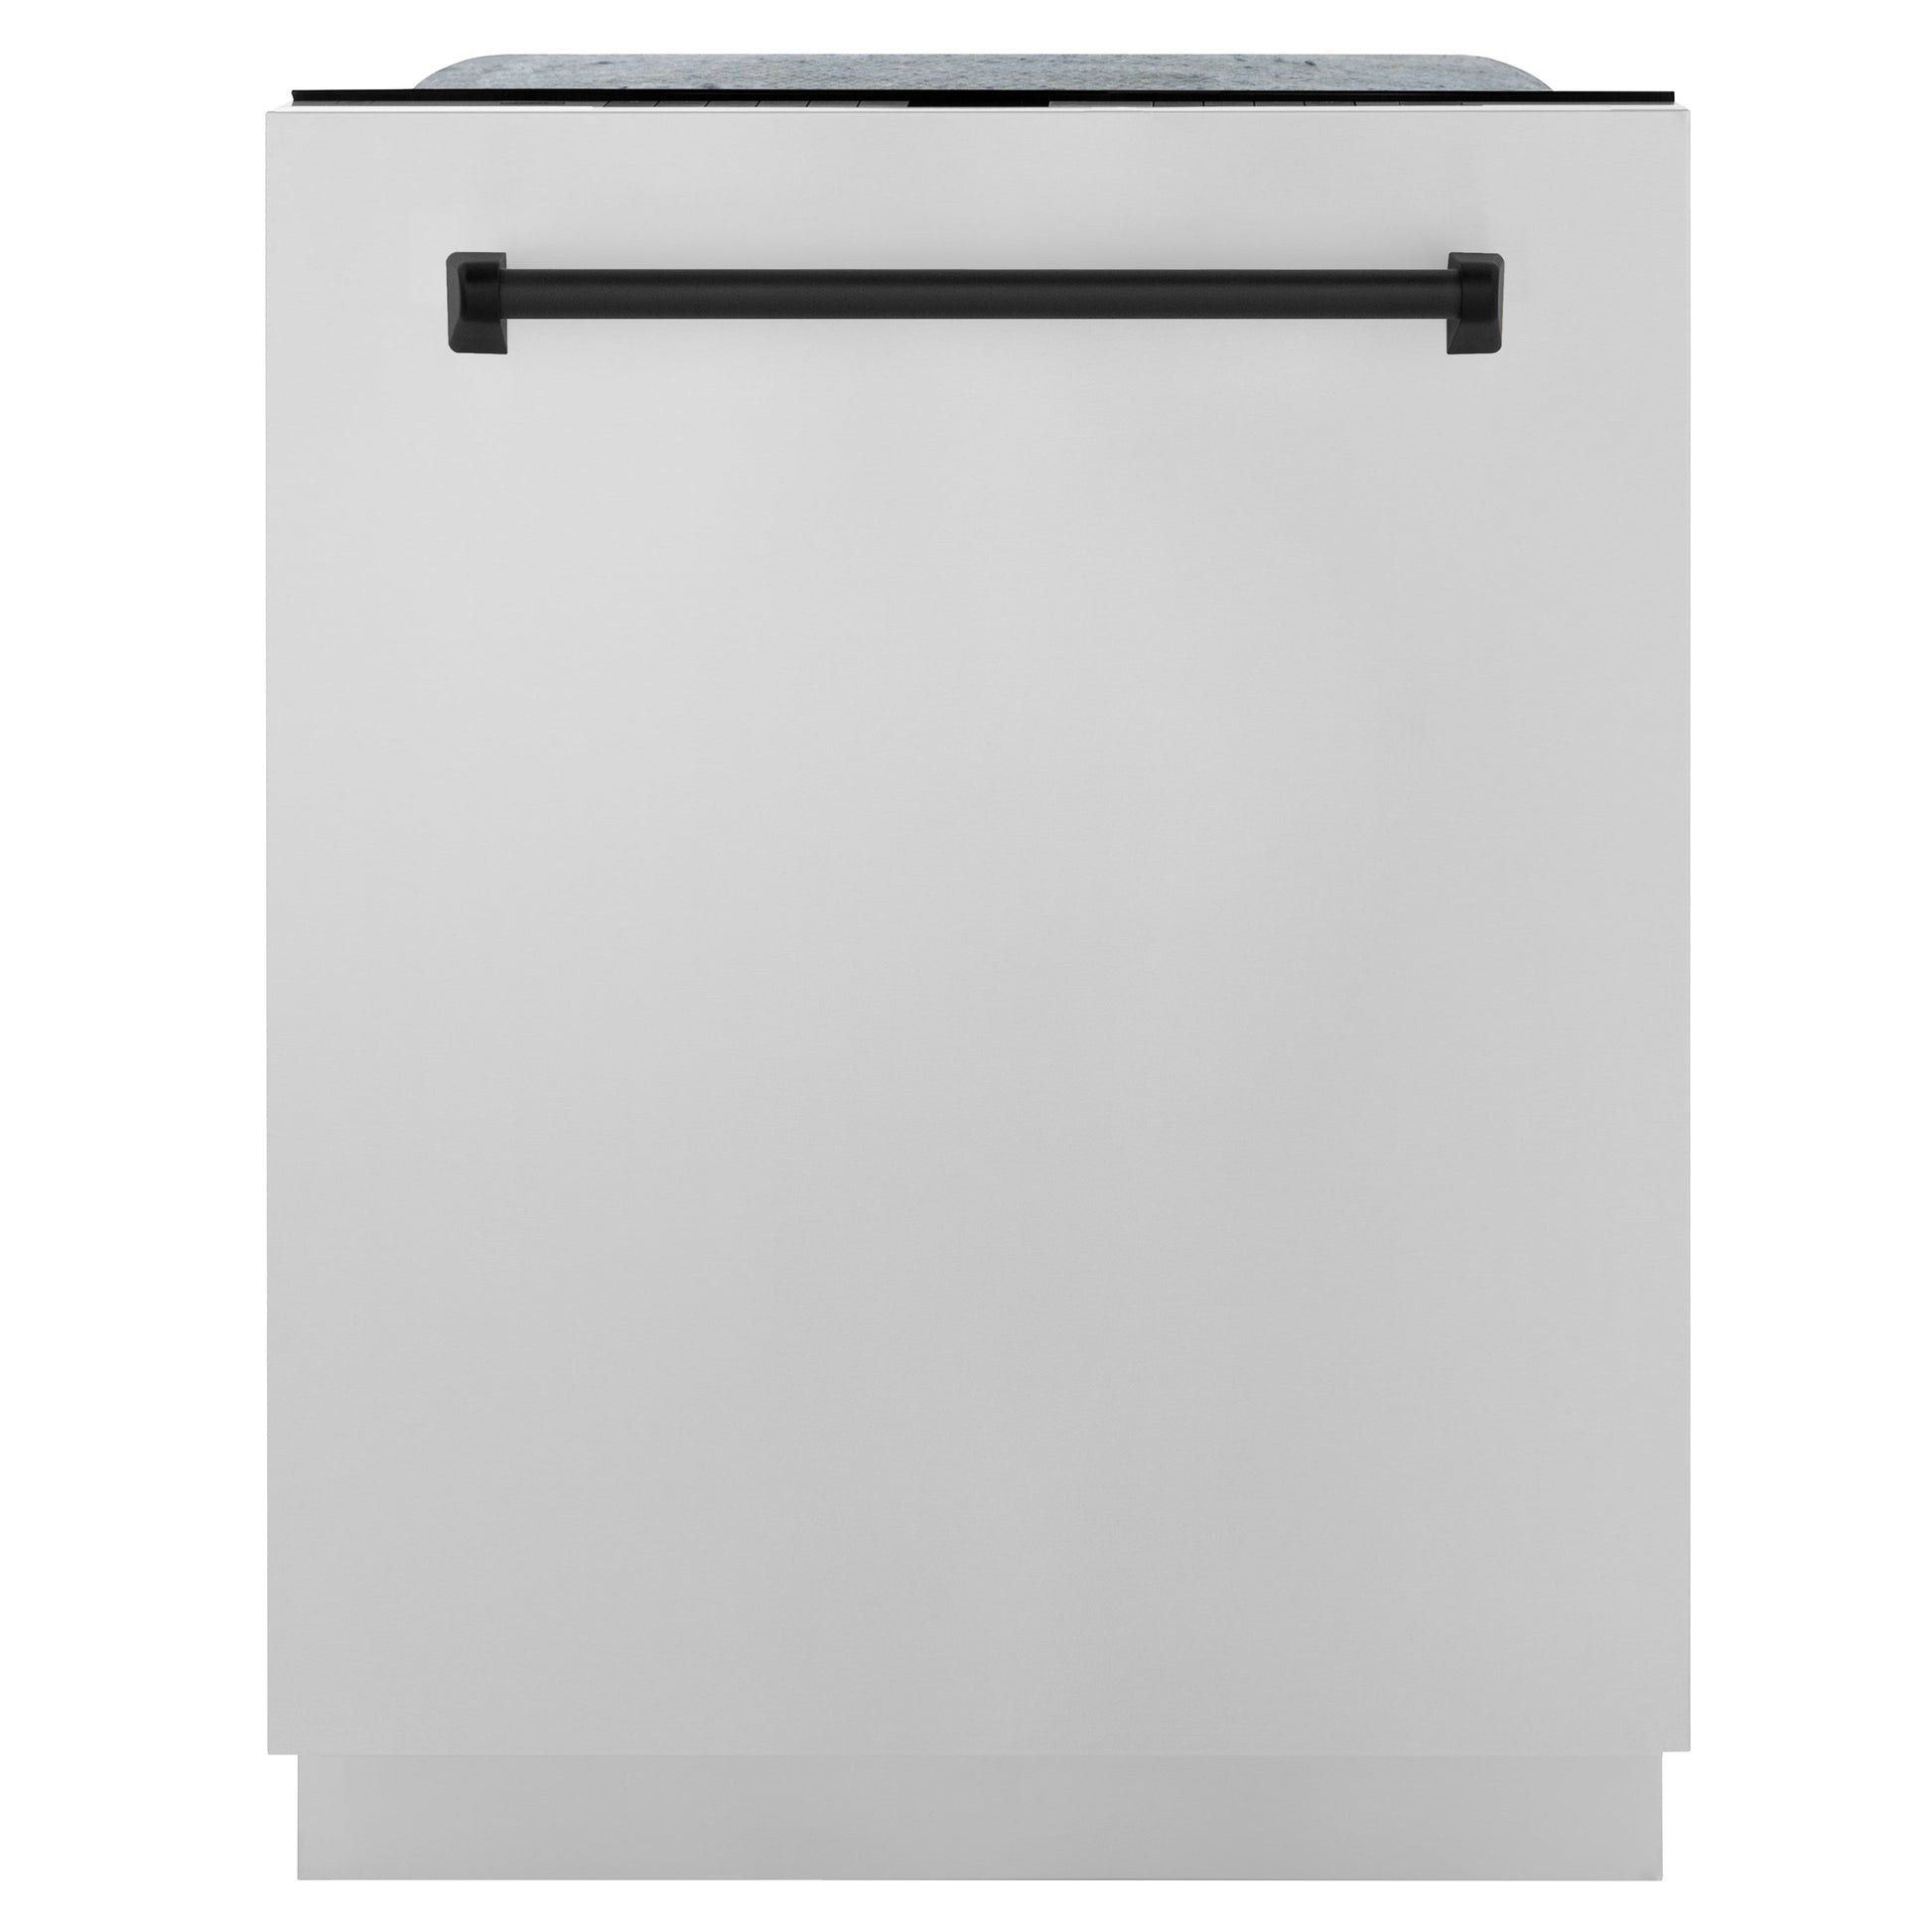 ZLINE Autograph Edition 24" 3rd Rack Top Touch Control Tall Tub Dishwasher - Stainless Steel with Accent Handle